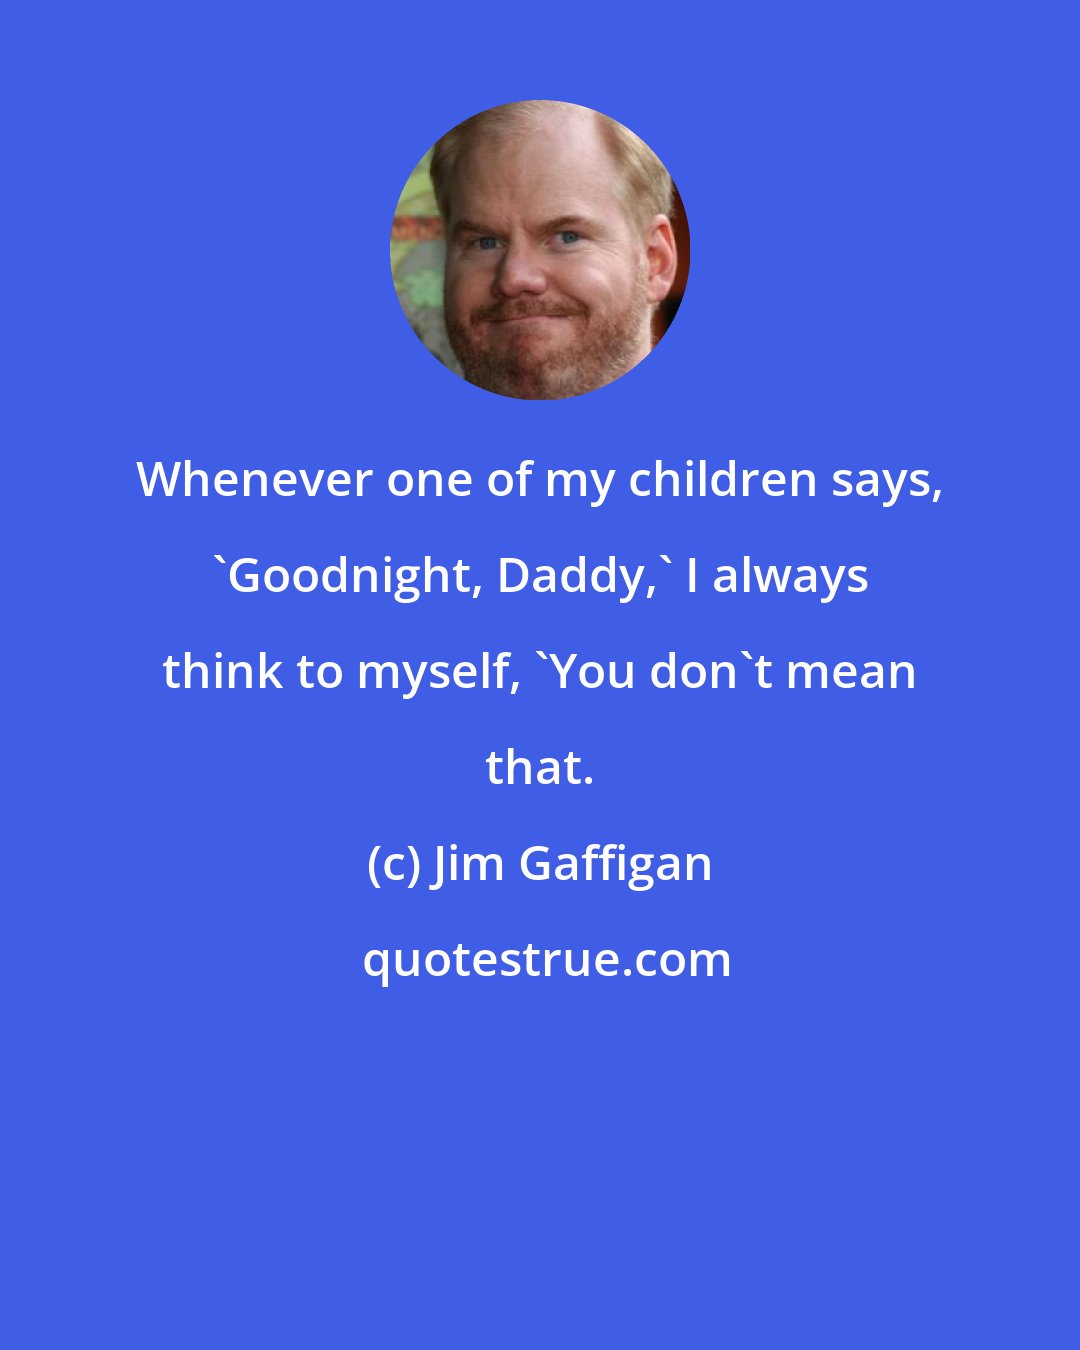 Jim Gaffigan: Whenever one of my children says, 'Goodnight, Daddy,' I always think to myself, 'You don't mean that.